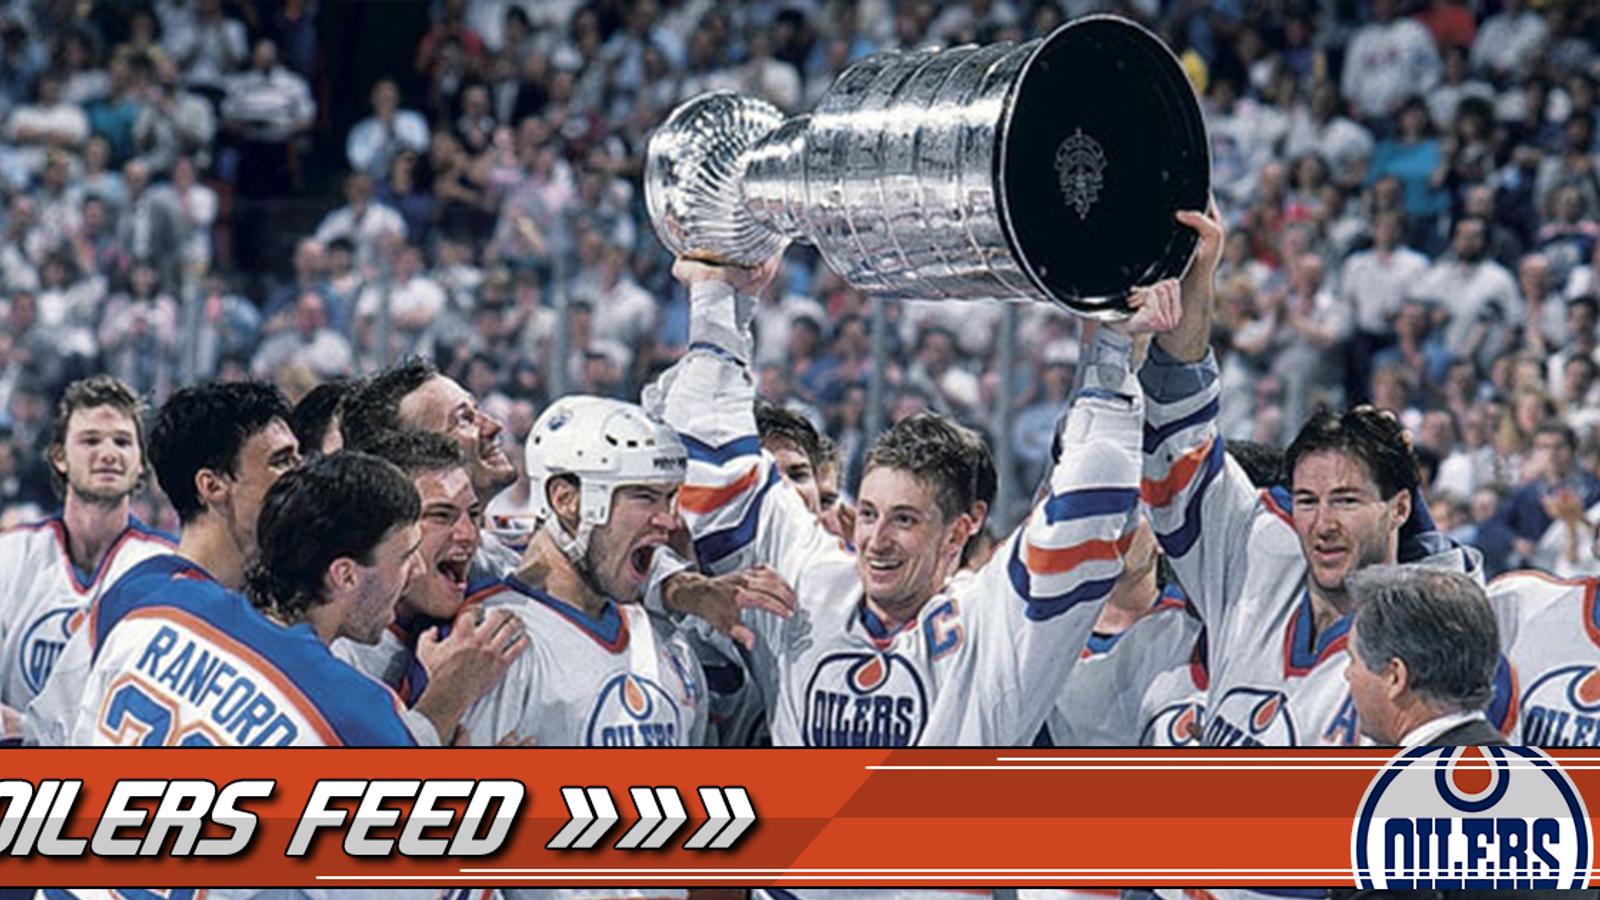 Over 3.5 million hockey fans vote for the NHL’s all-time greatest team